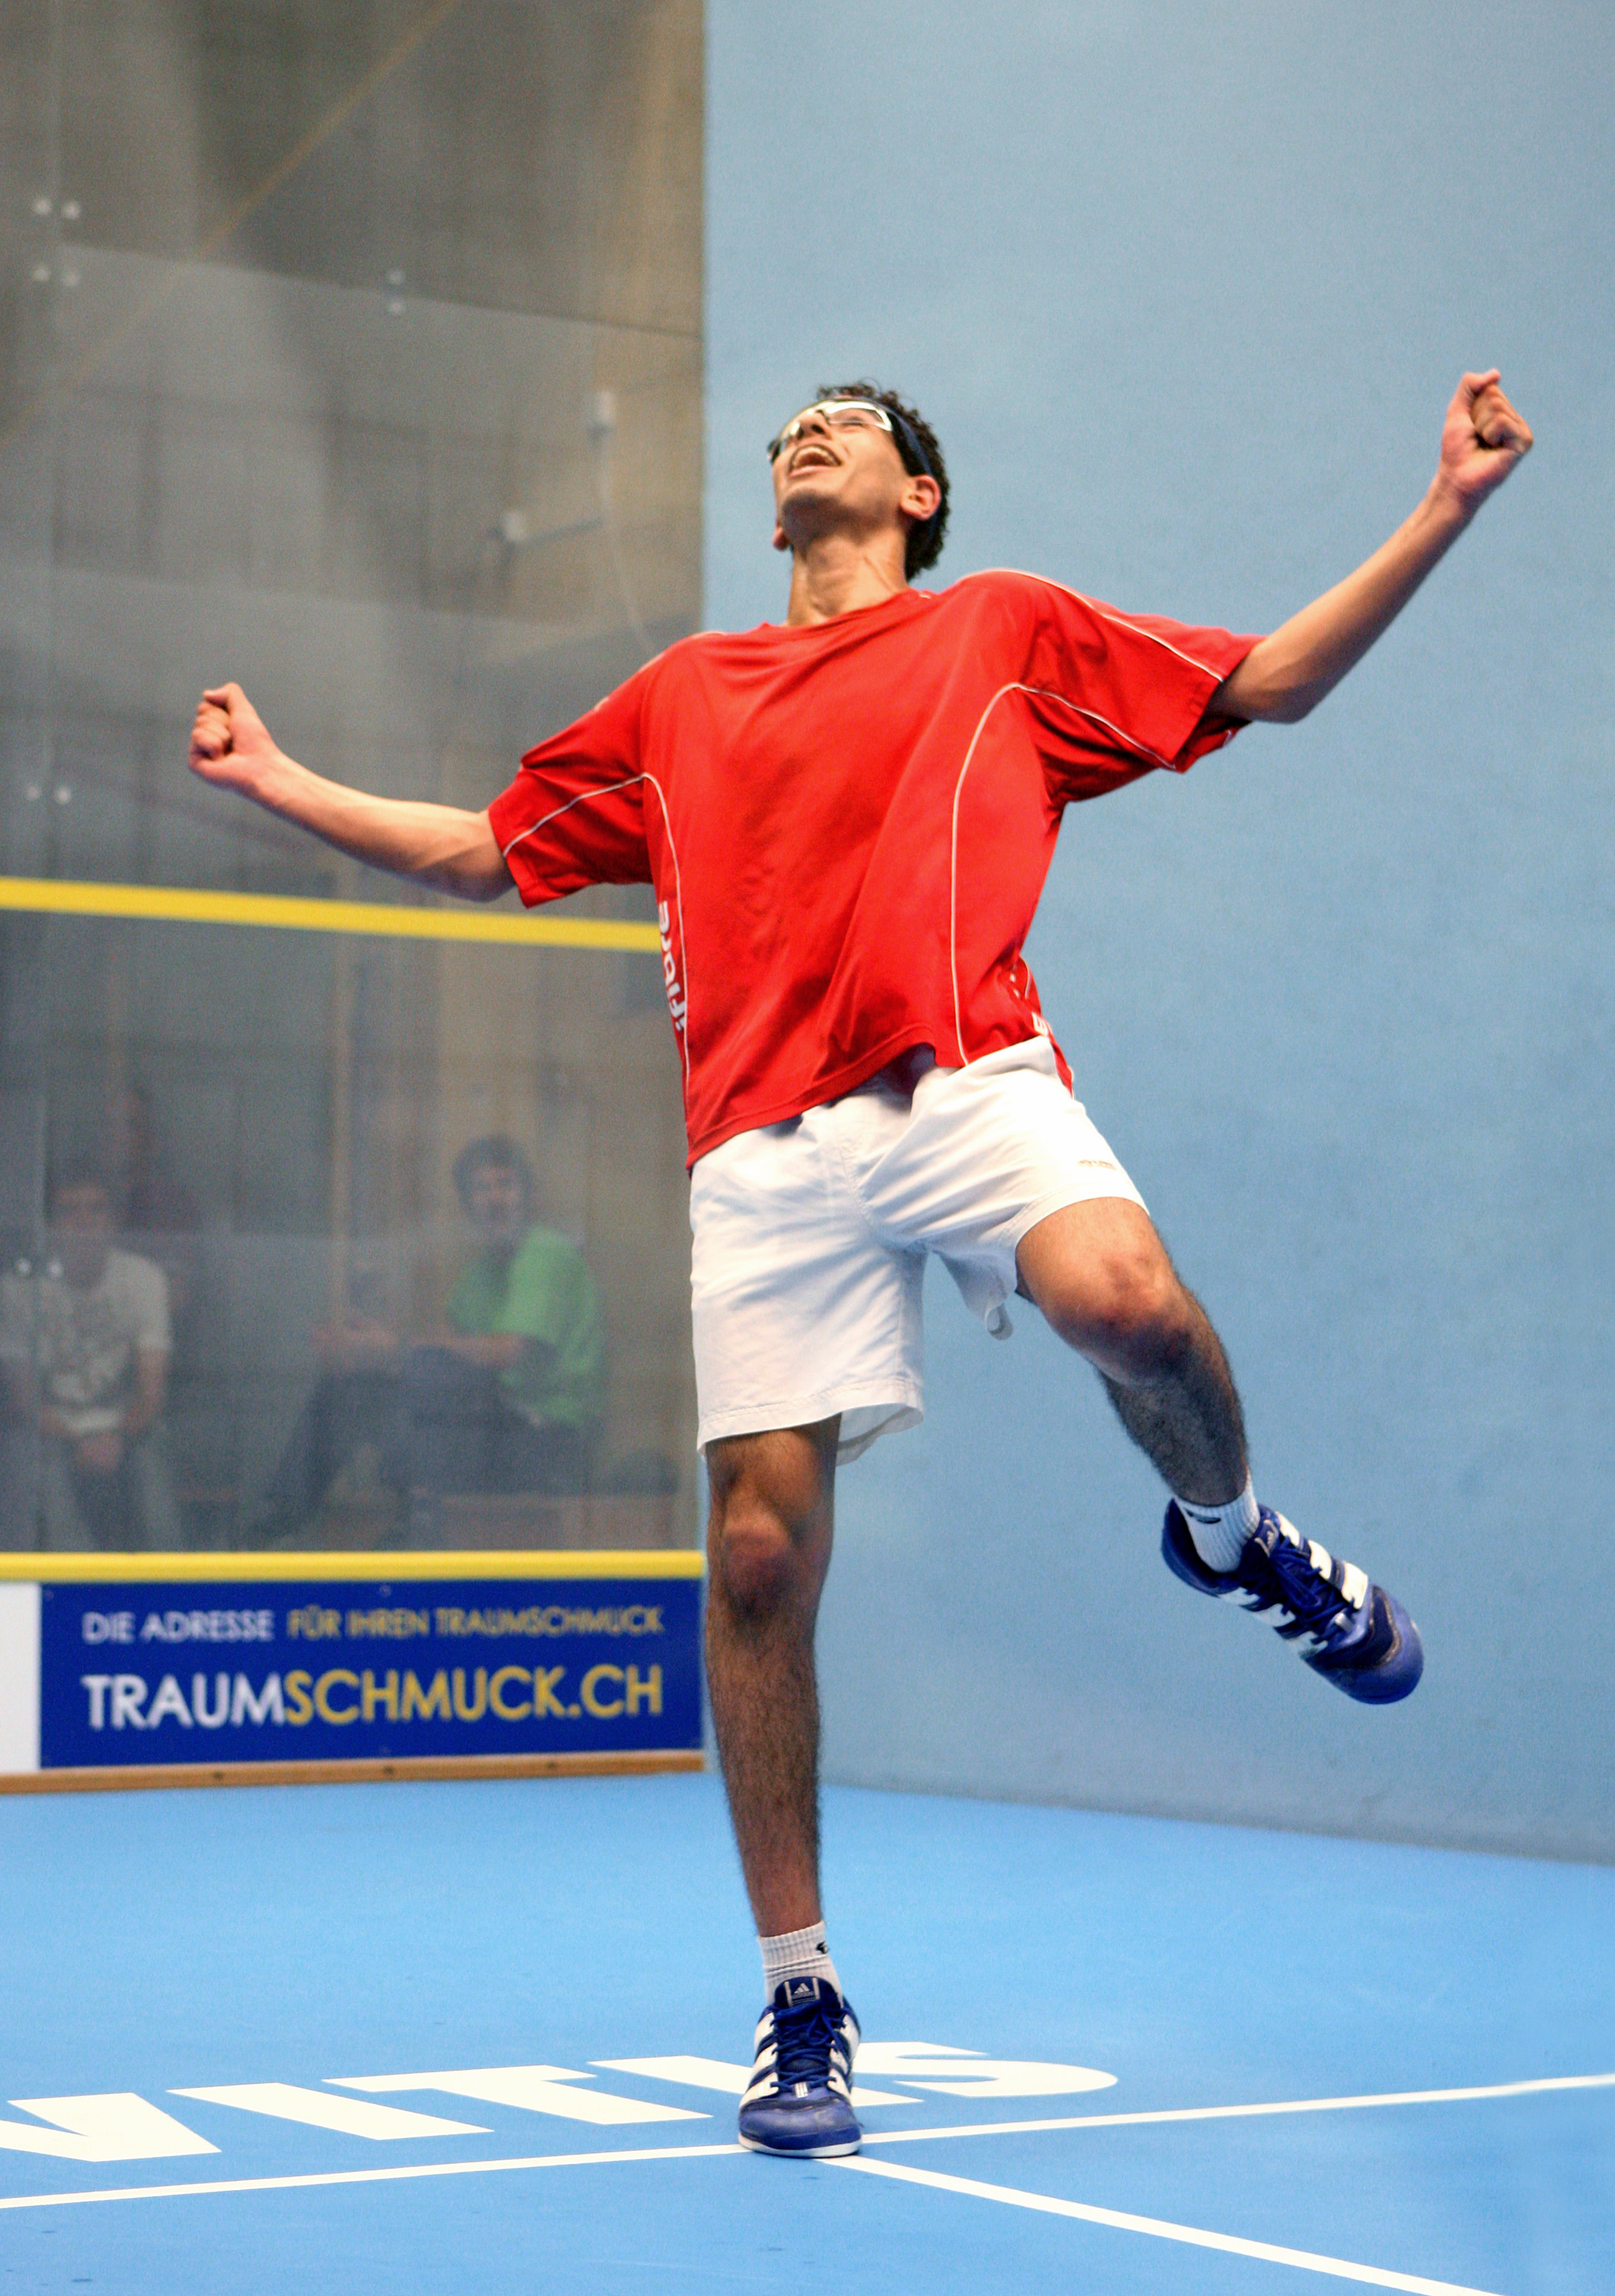 Mohamed El Shorbagy of Egypt could hardly contain himself after his surprising upset over Pakistan’s Aamir Atlas Khan in the individual final of the 2008 World Junior Men’s Championship. For Khan, it was his third time playing in the event after losing in the semifinals in both 2004 and 2006.